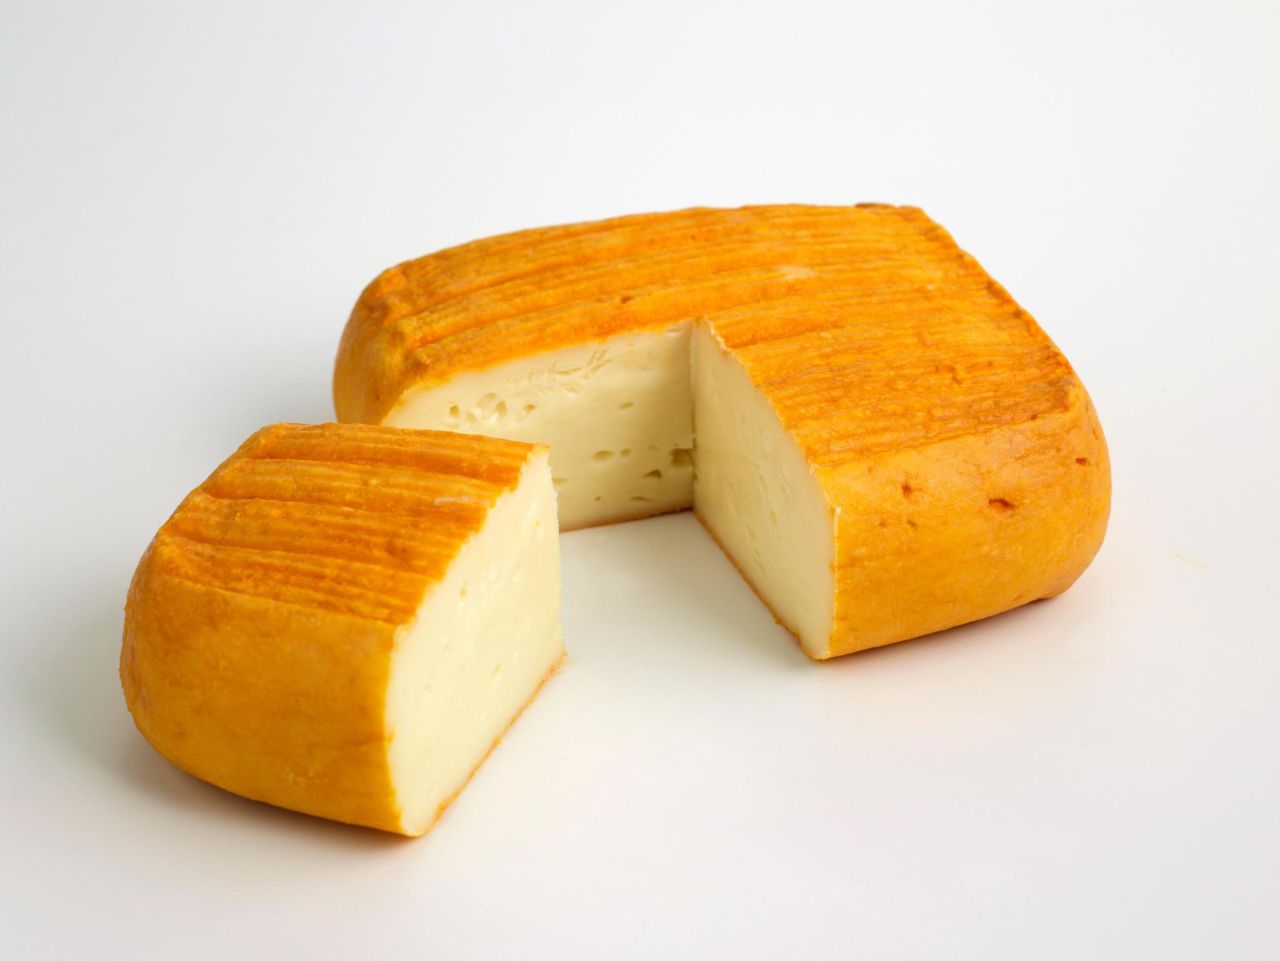 This mild-looking cheese is the world's smelliest.